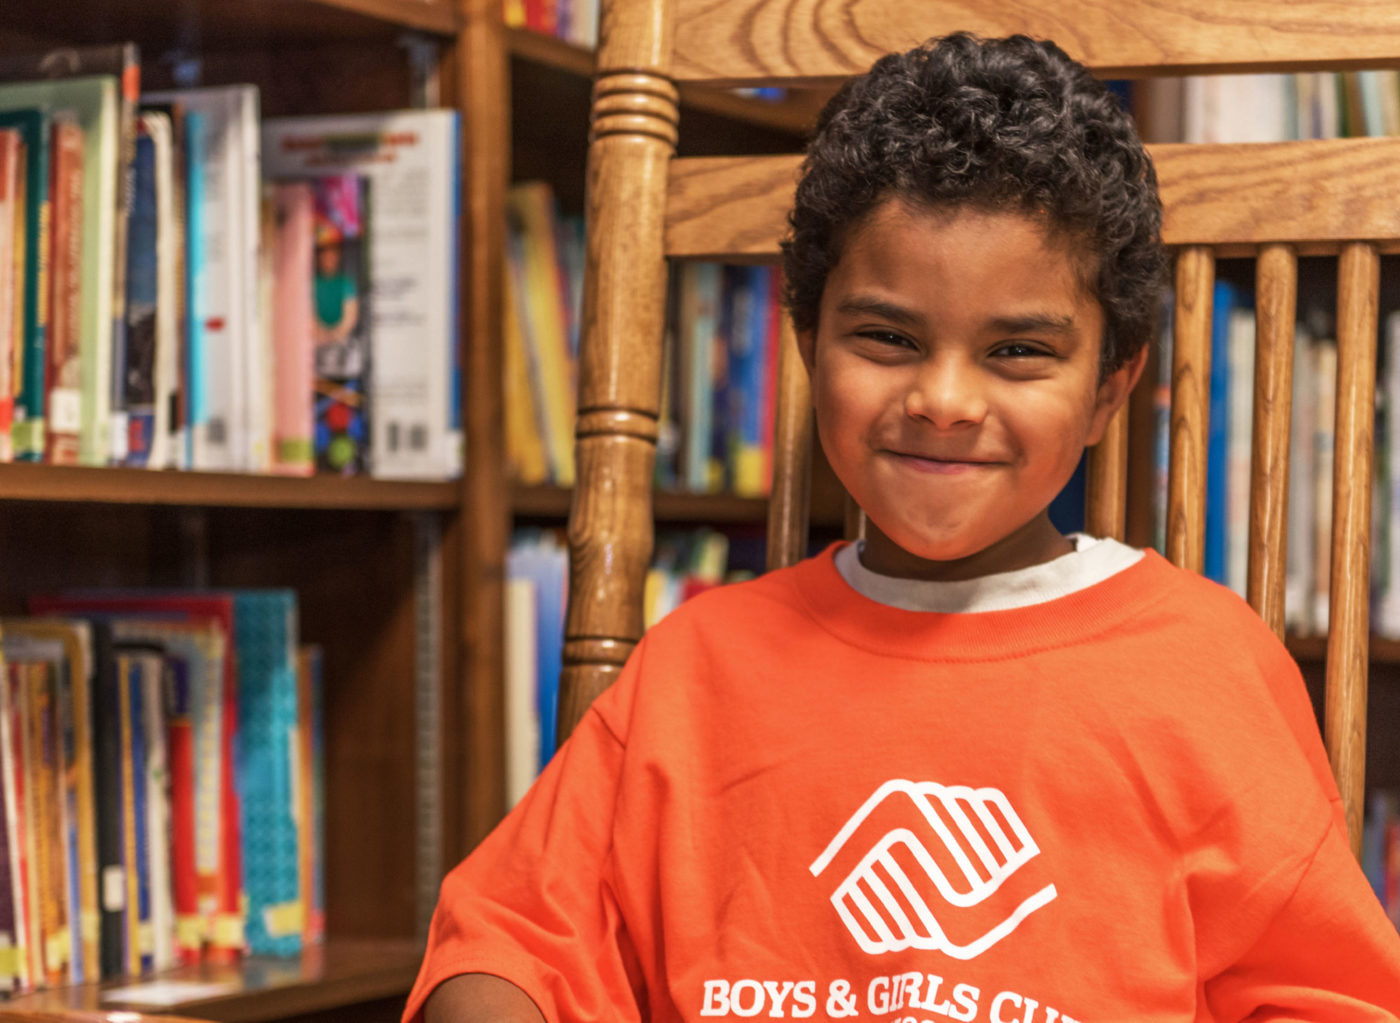 A young boy in an orange Boys & Girls Club t-shirt sits in a chair with a book in his lap.